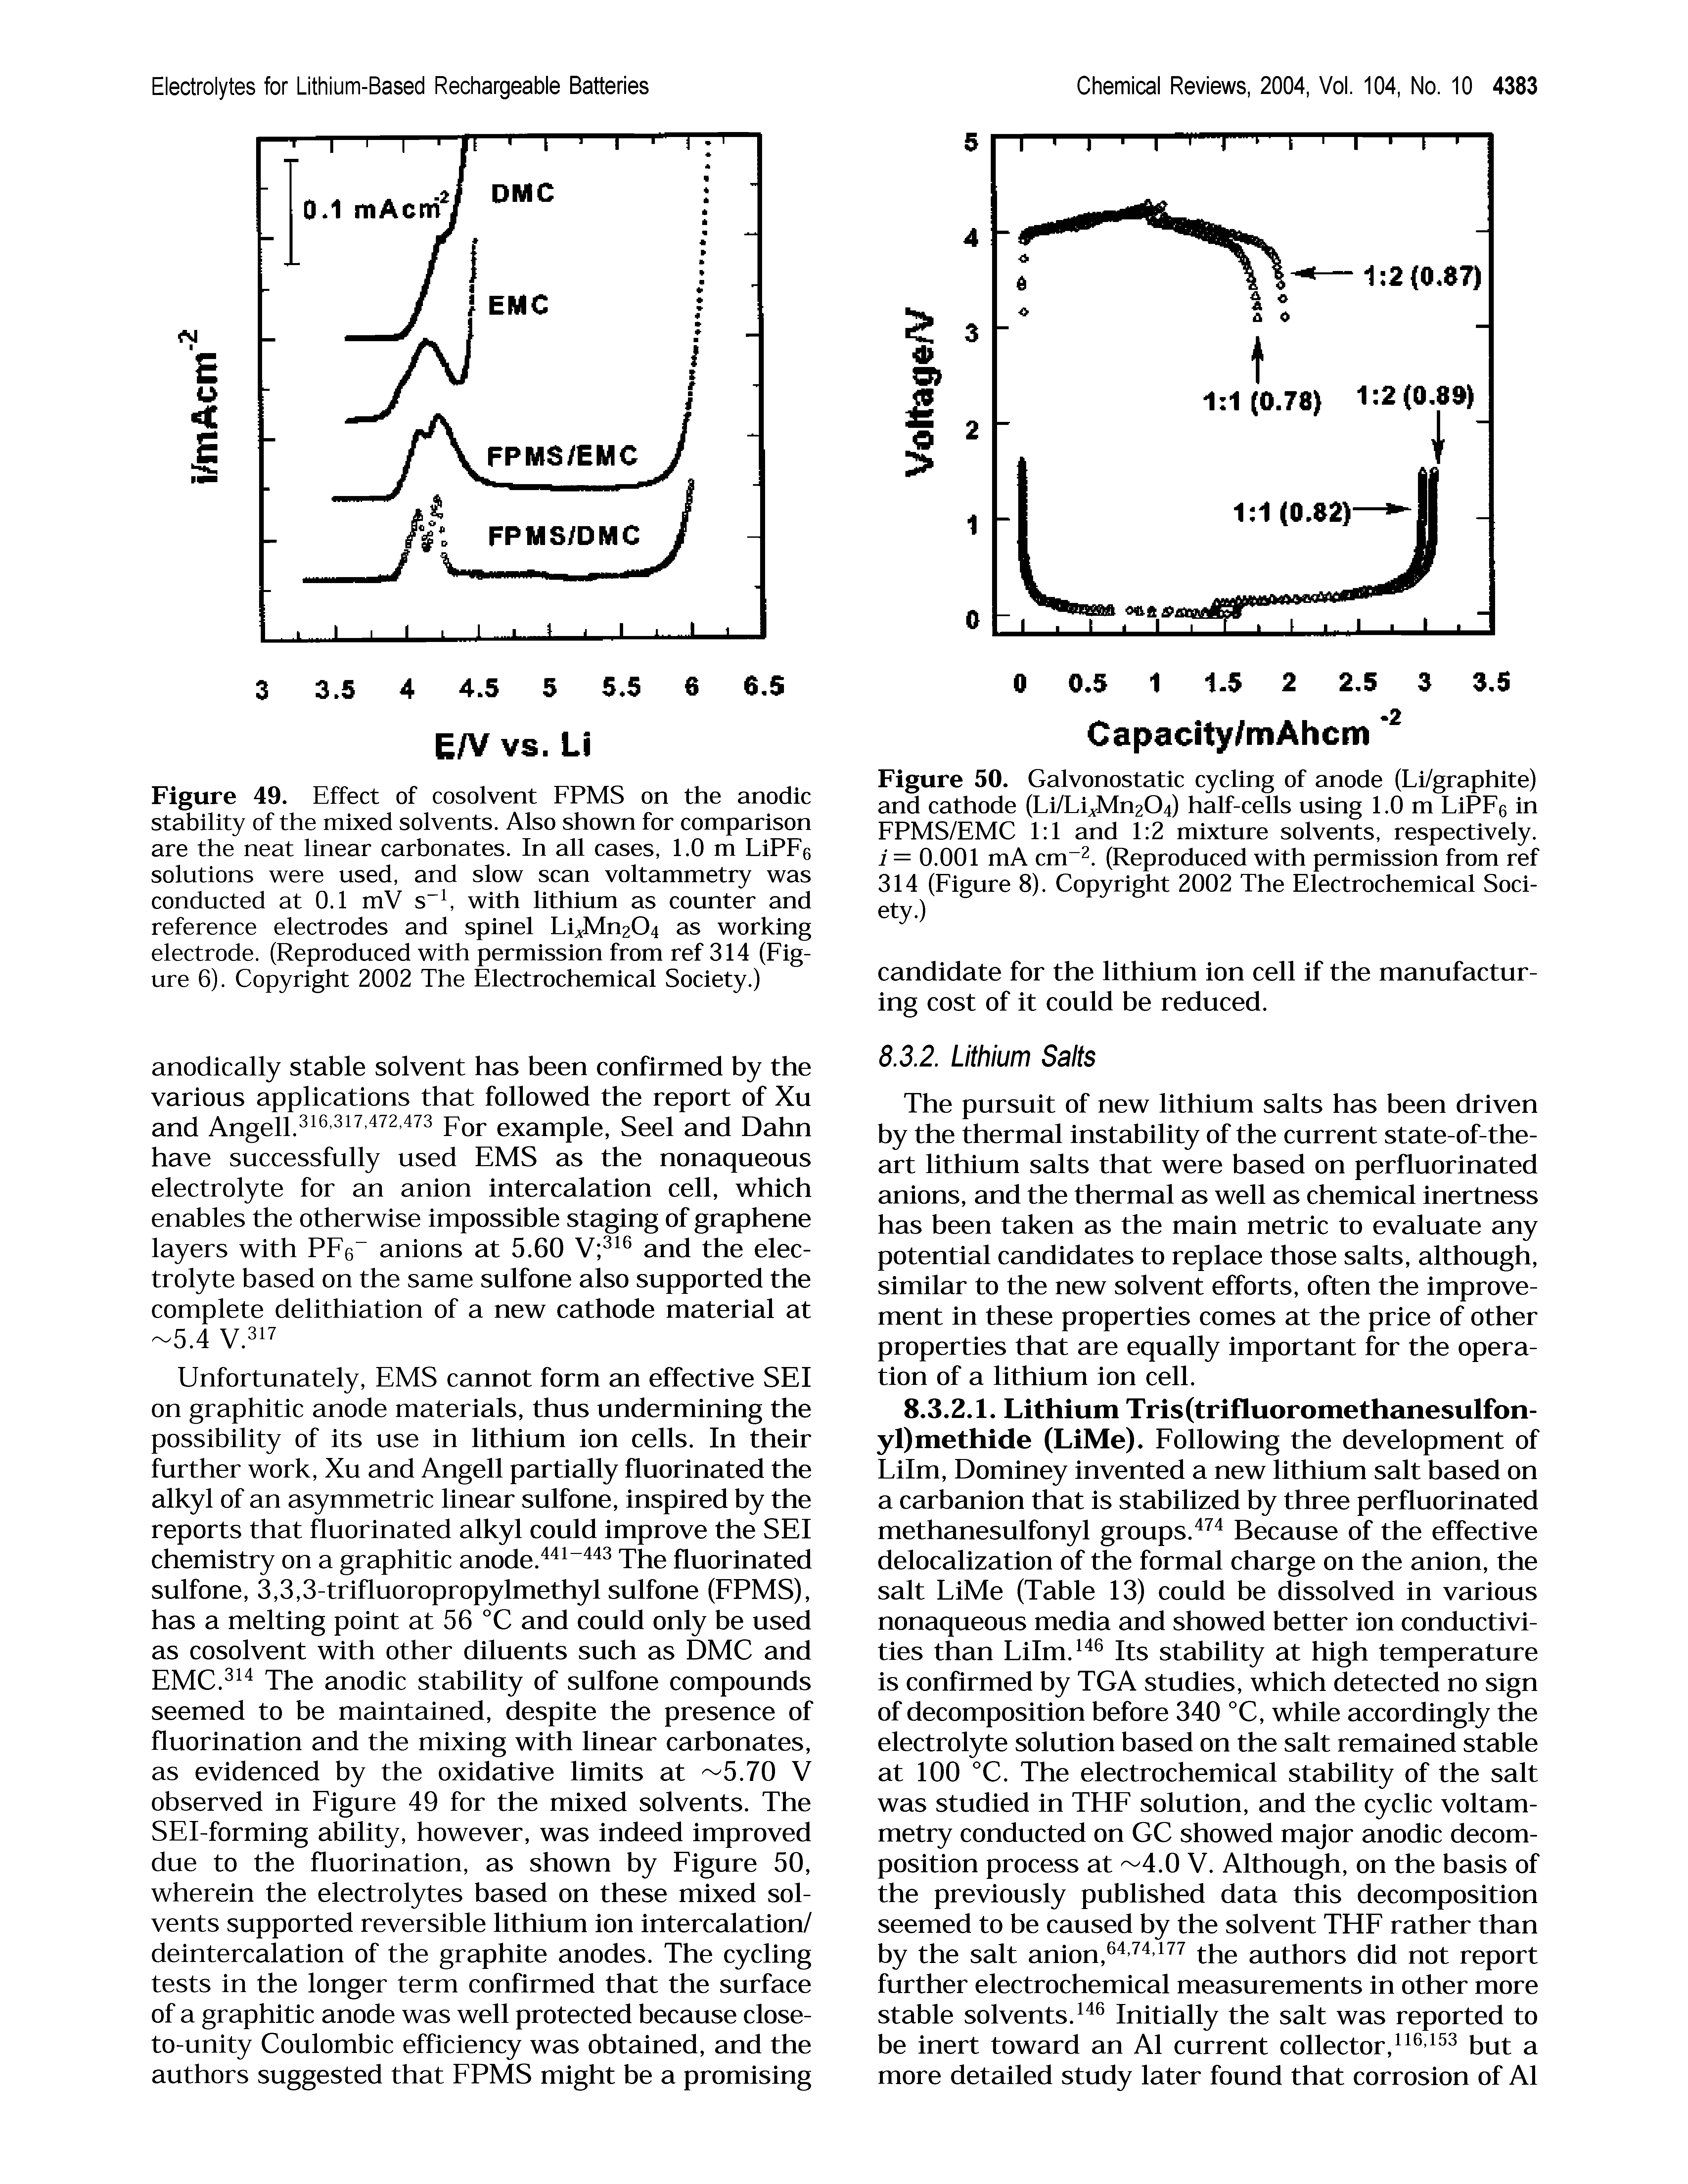 Figure 49. Effect of cosolvent FPMS on the anodic stability of the mixed solvents. Also shown for comparison are the neat linear carbonates. In all cases, 1.0 m LiPFe solutions were used, and slow scan voltammetry was conducted at 0.1 mV s with lithium as counter and reference electrodes and spinel LiJV[n204 as working electrode. (Reproduced with permission from ref 314 (Figure 6). Copyright 2002 The Electrochemical Society.)...